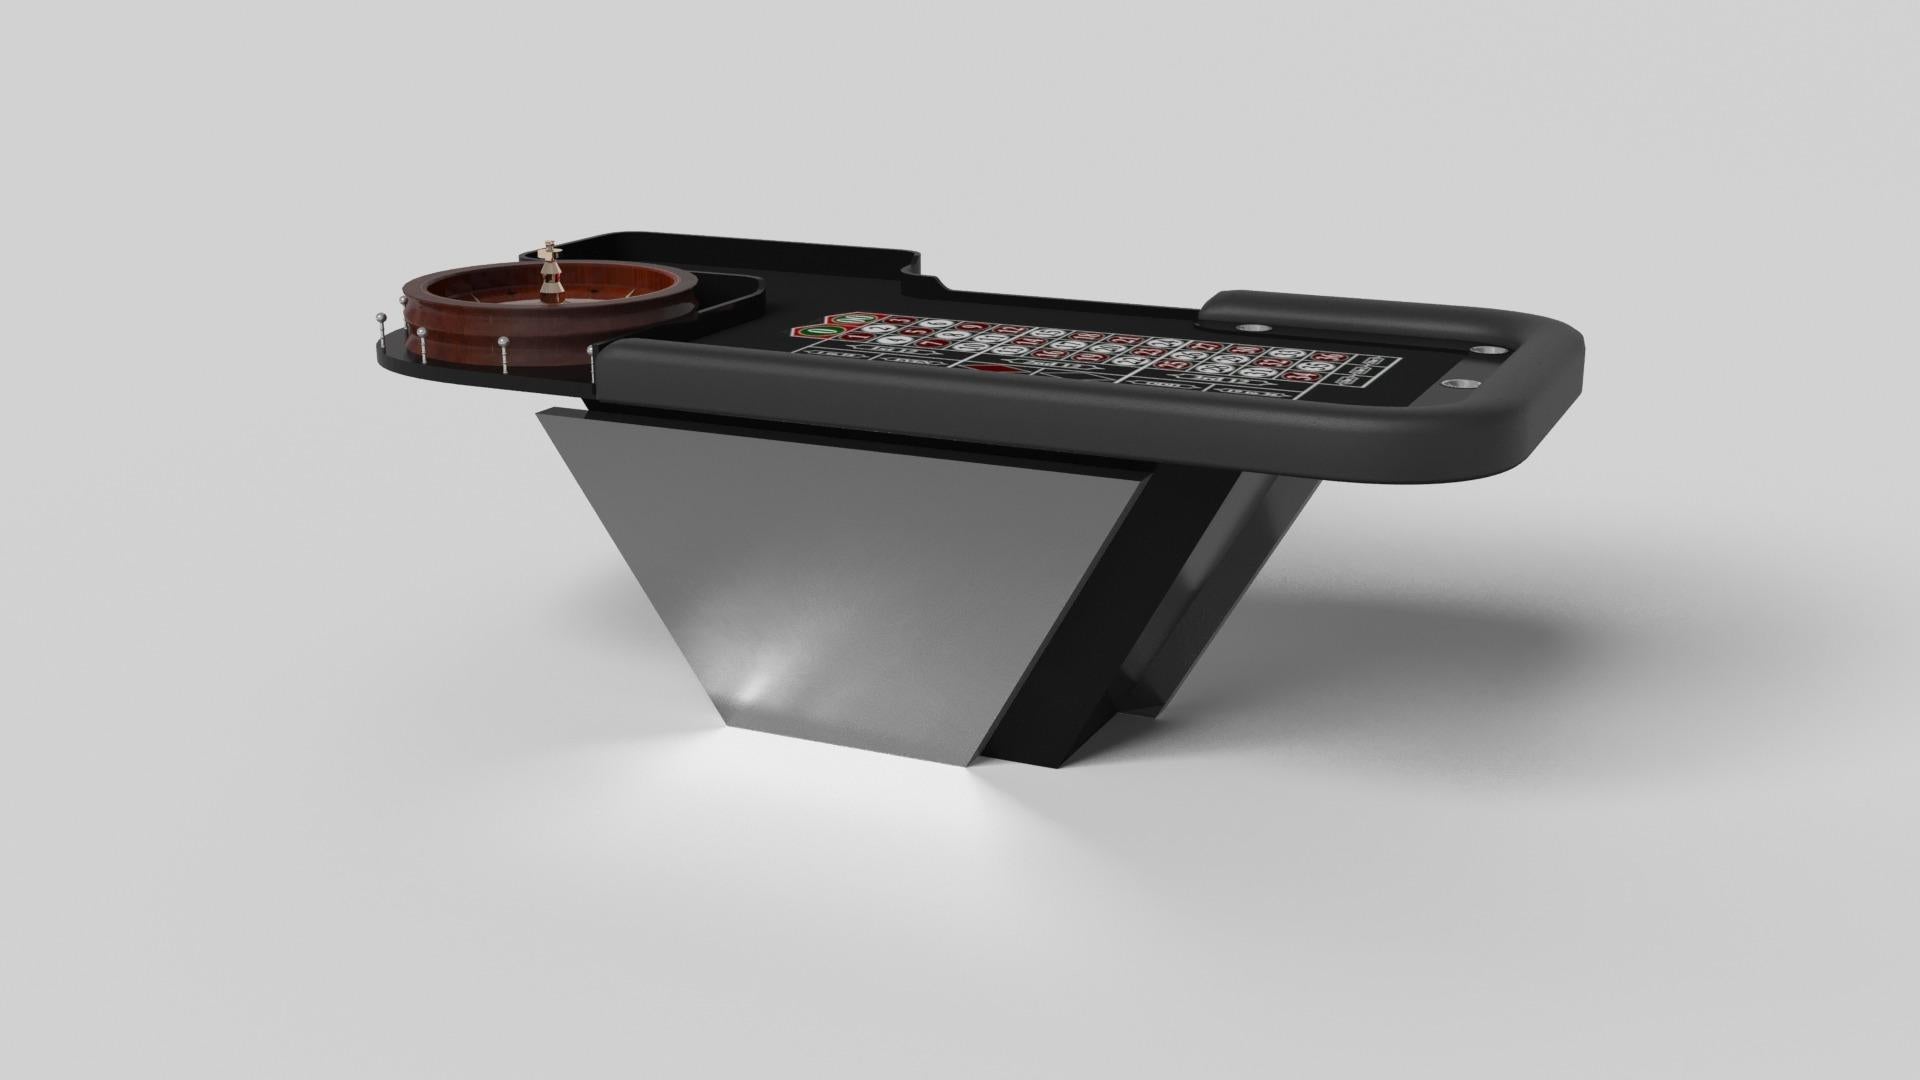 Handcrafted with clean lines, sharp angles, and a pyramid base, the Vogue roulette table in brushed aluminum strikes the perfect balance between sport-inspired style and contemporary design. Timeless in its appeal and revered for its practicality